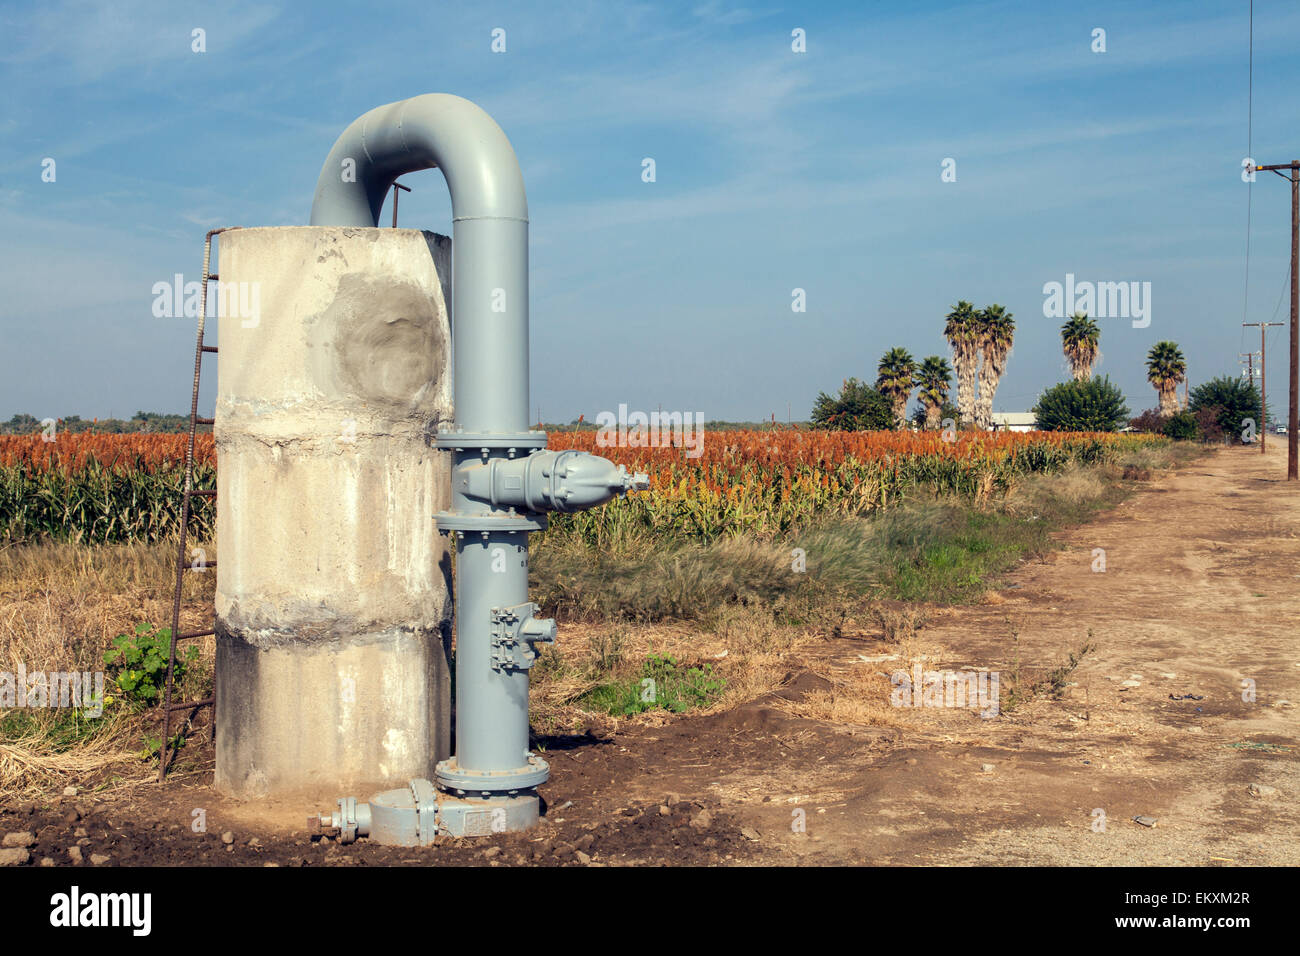 Groundwater well and standpipe for crop irrigation. Porterville, Tulare County, San Joaquin Valley, California, USA Stock Photo